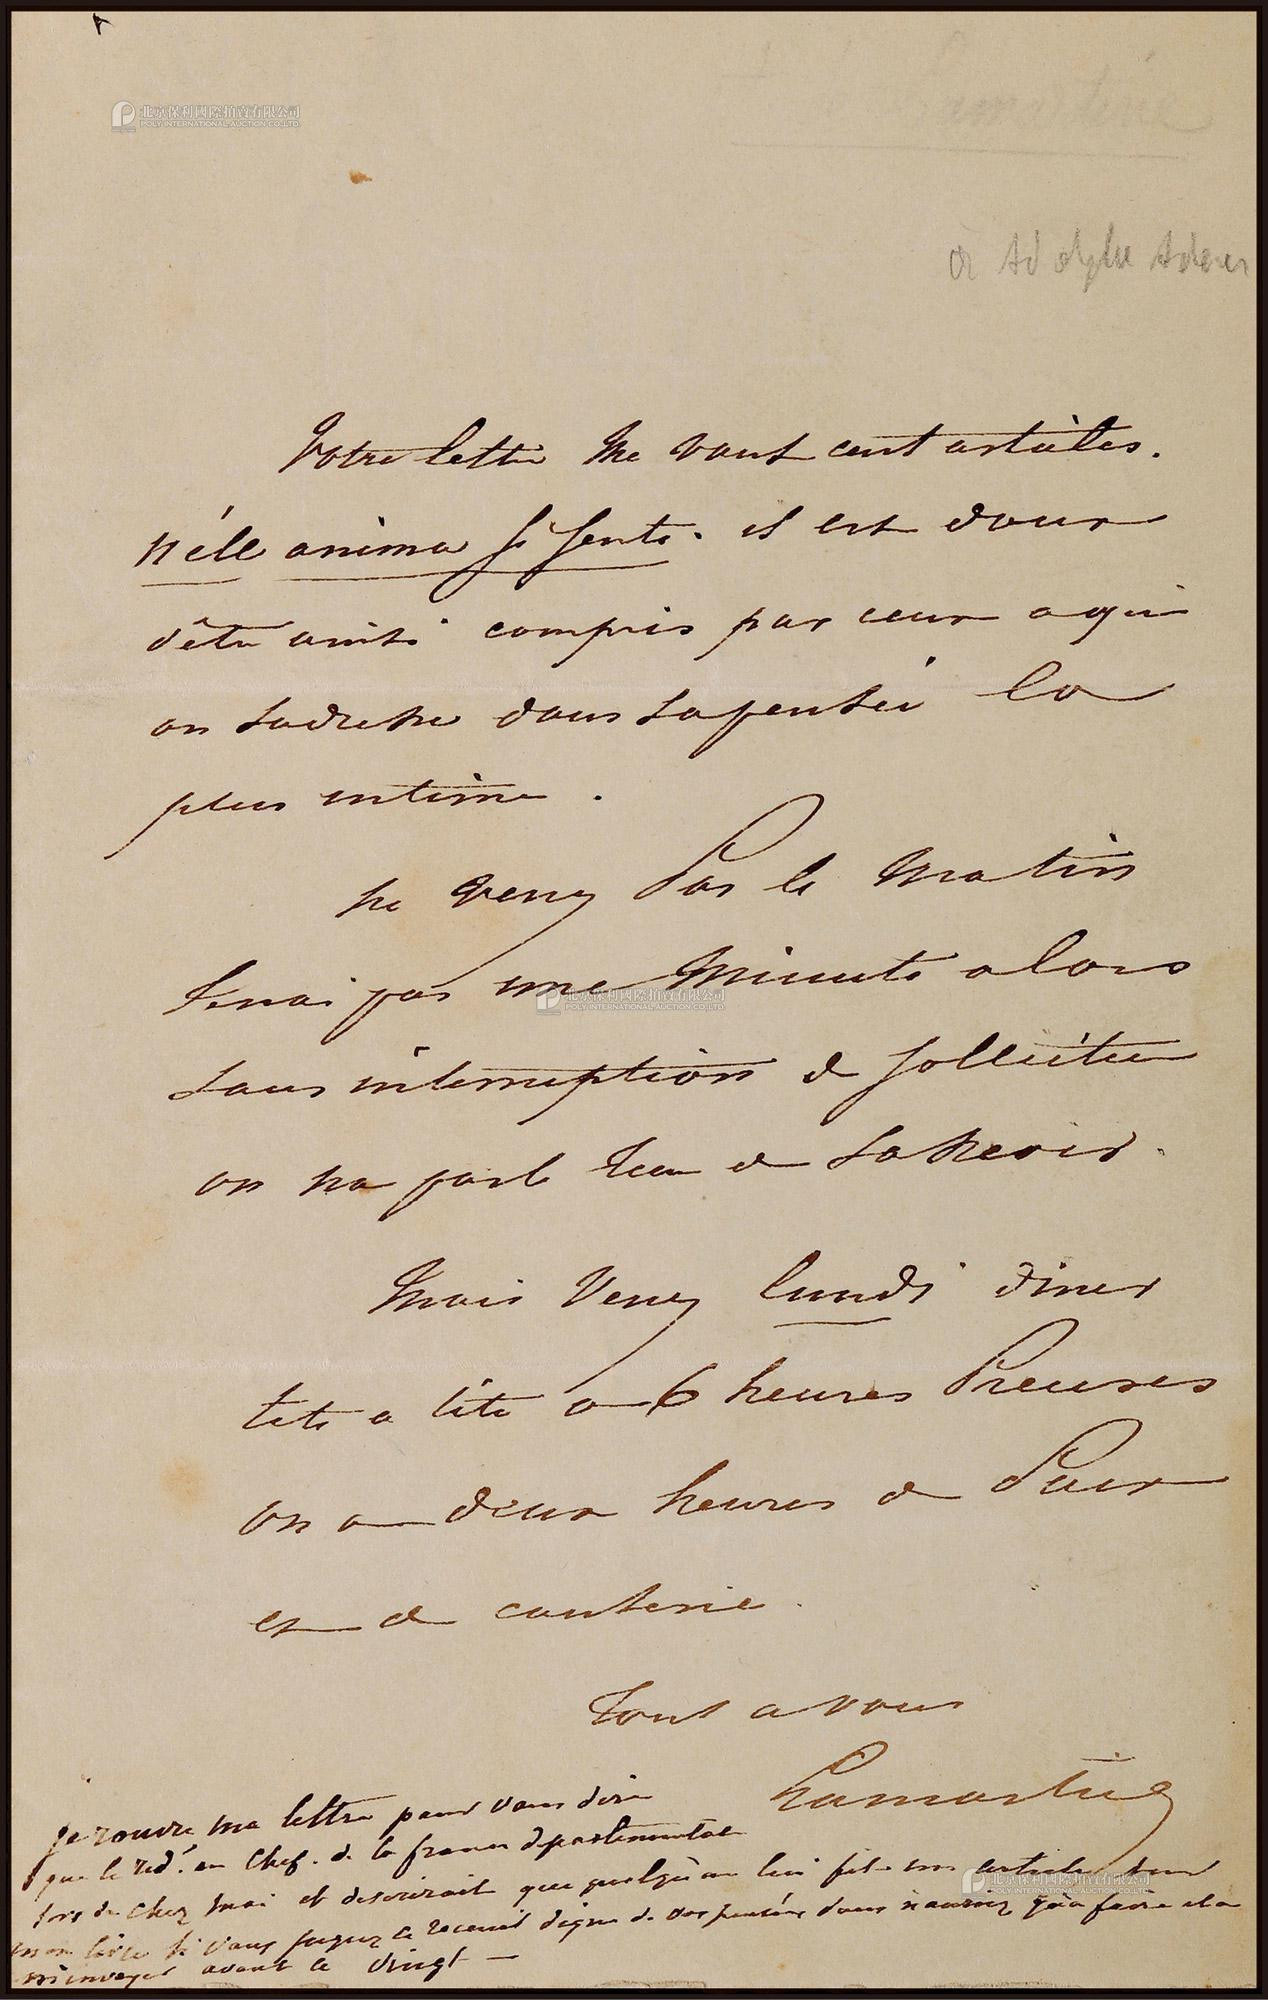 The autograph letter from Alphonse Lamartine, “Pioneer of French Romantic literature”, with certificate